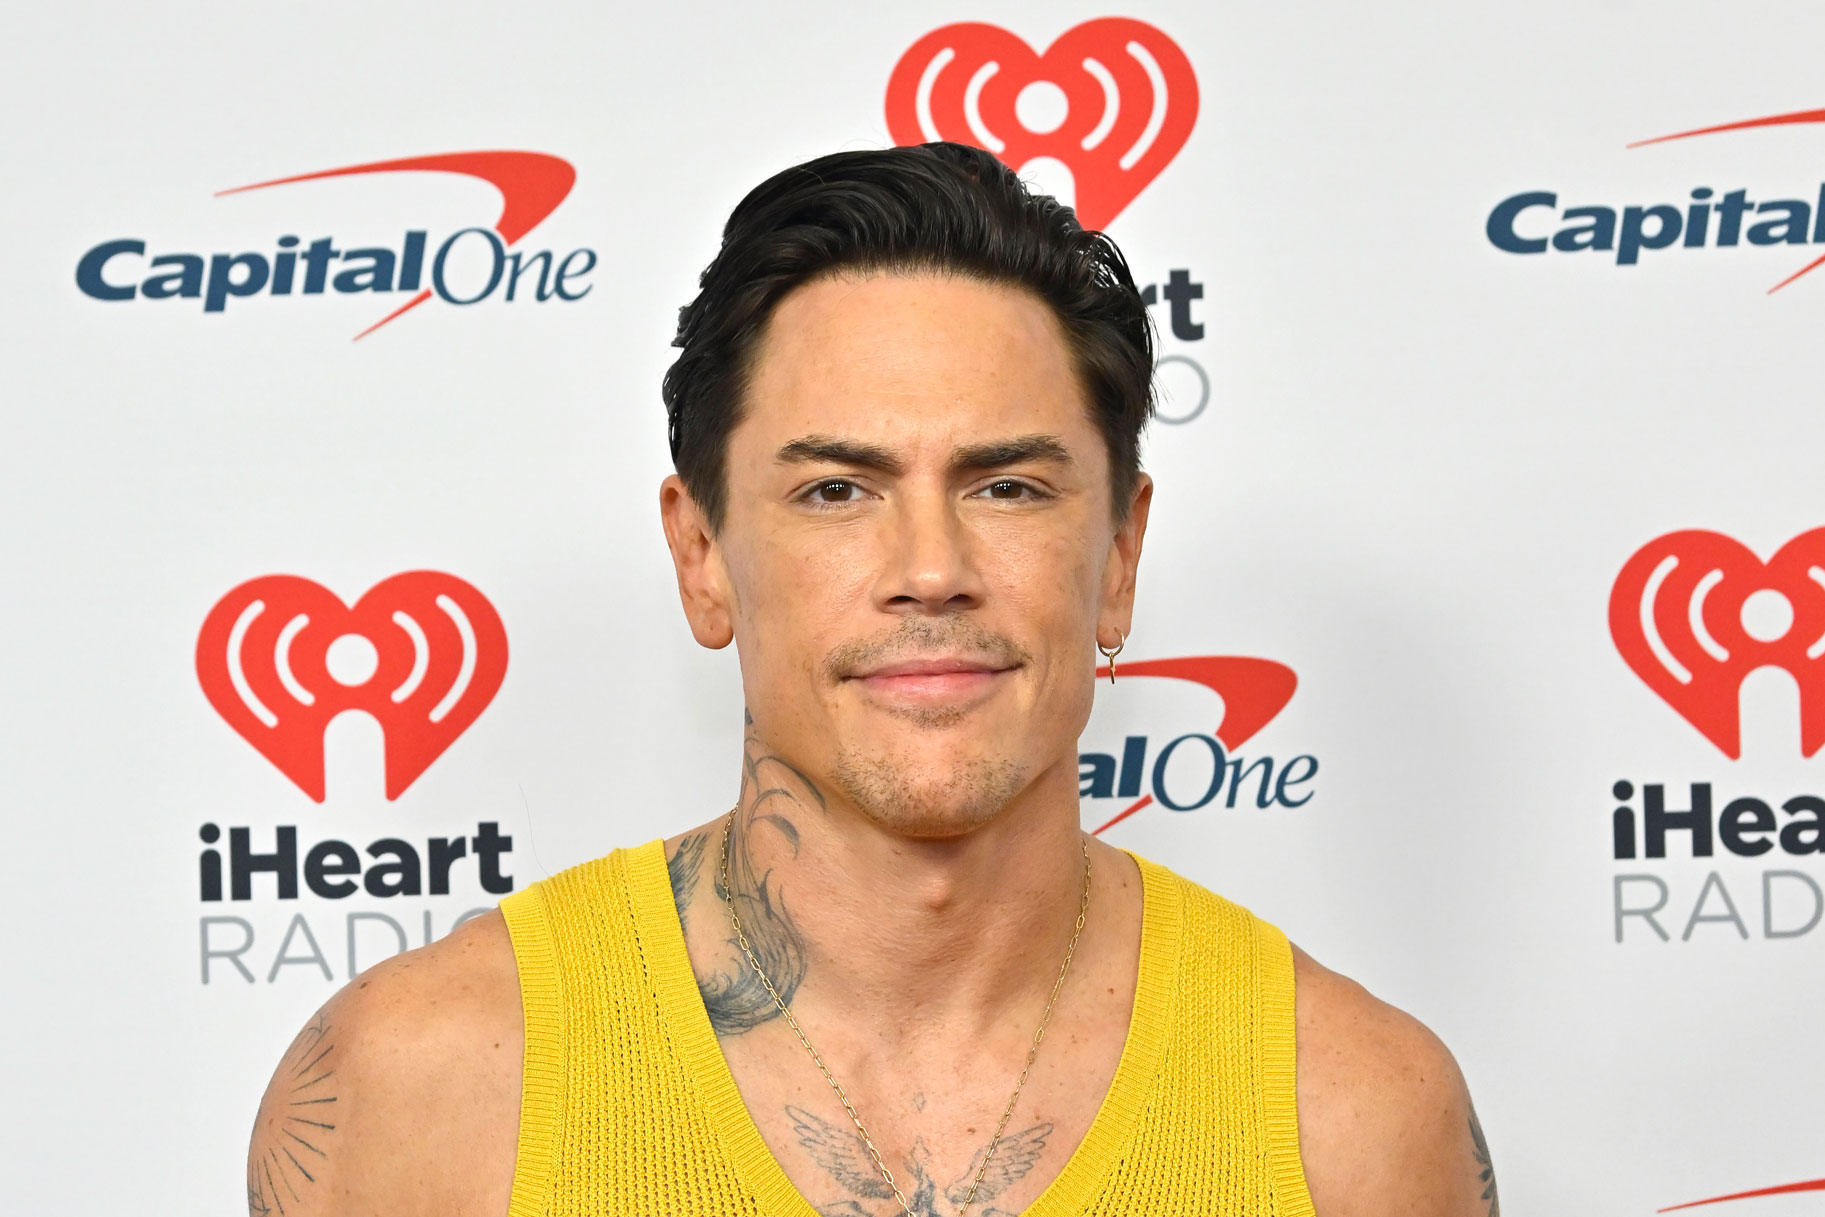 tom-sandoval-celebrates-the-end-of-a-challenging-year-with-festive-karaoke-night